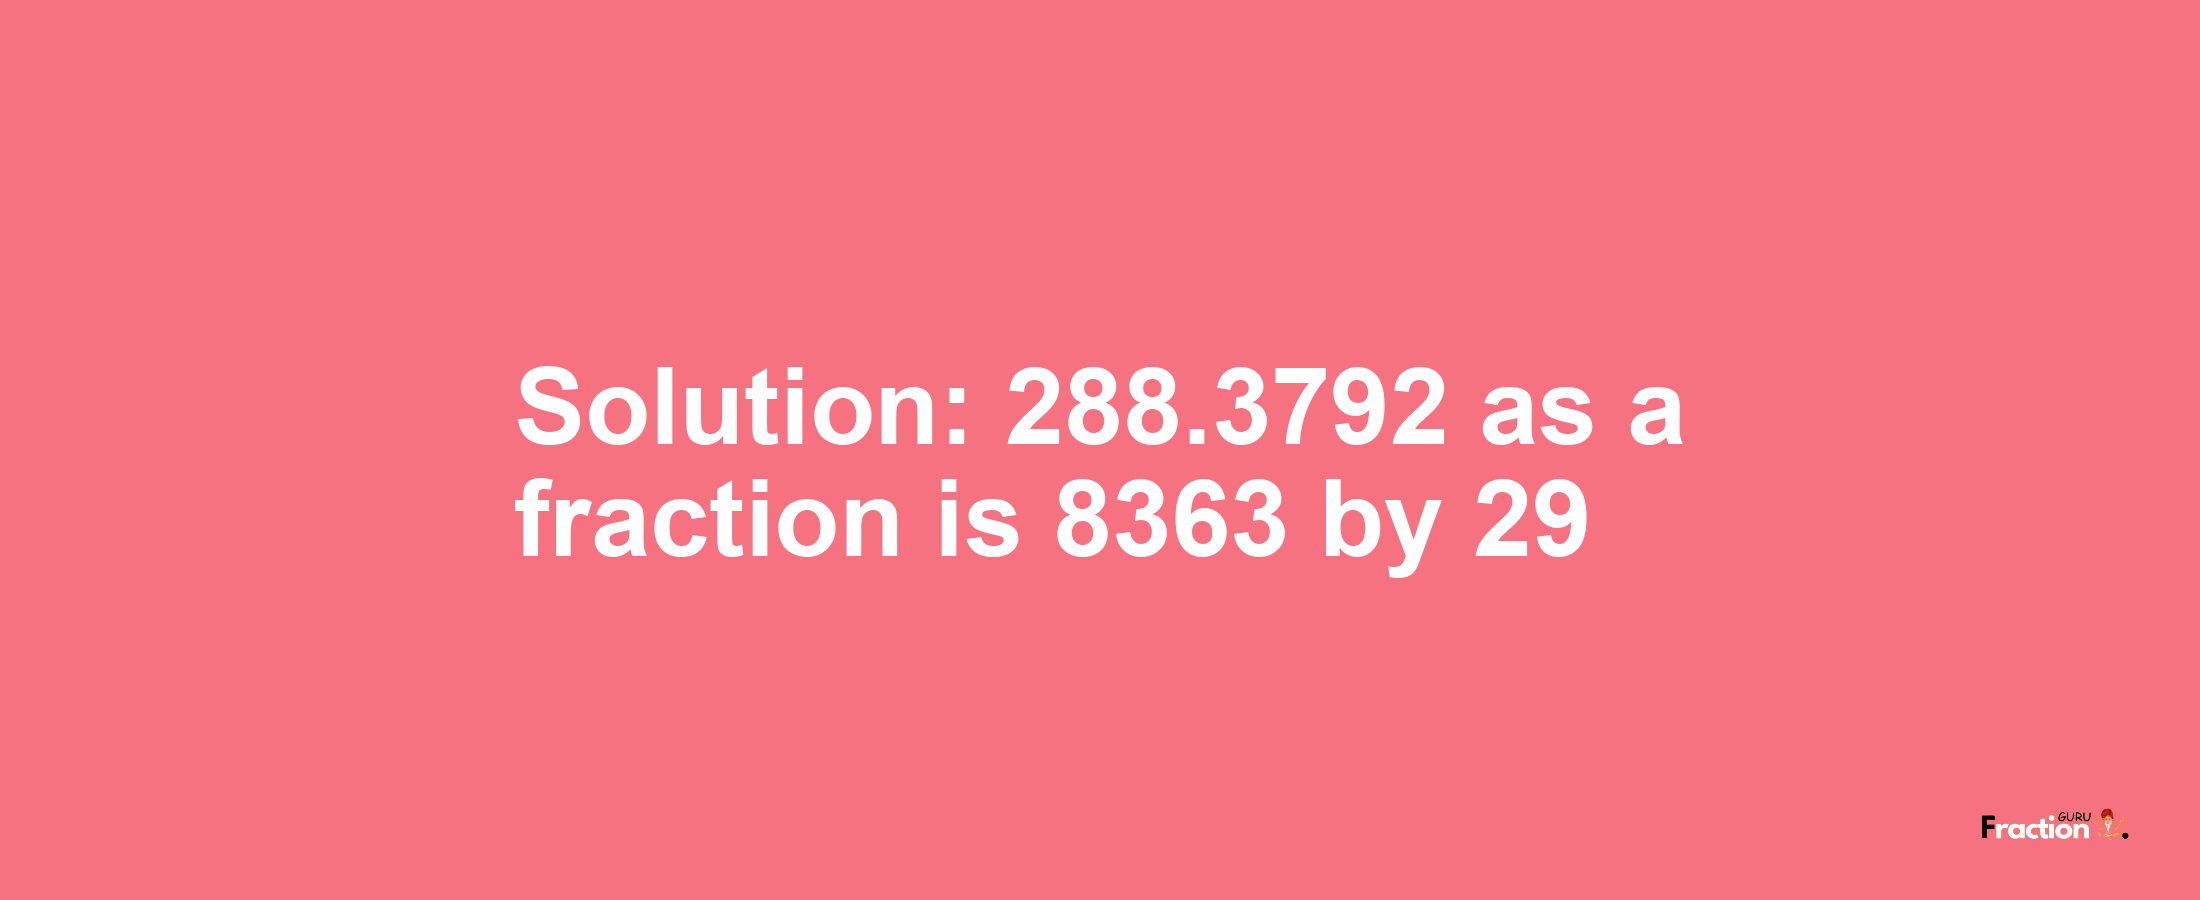 Solution:288.3792 as a fraction is 8363/29